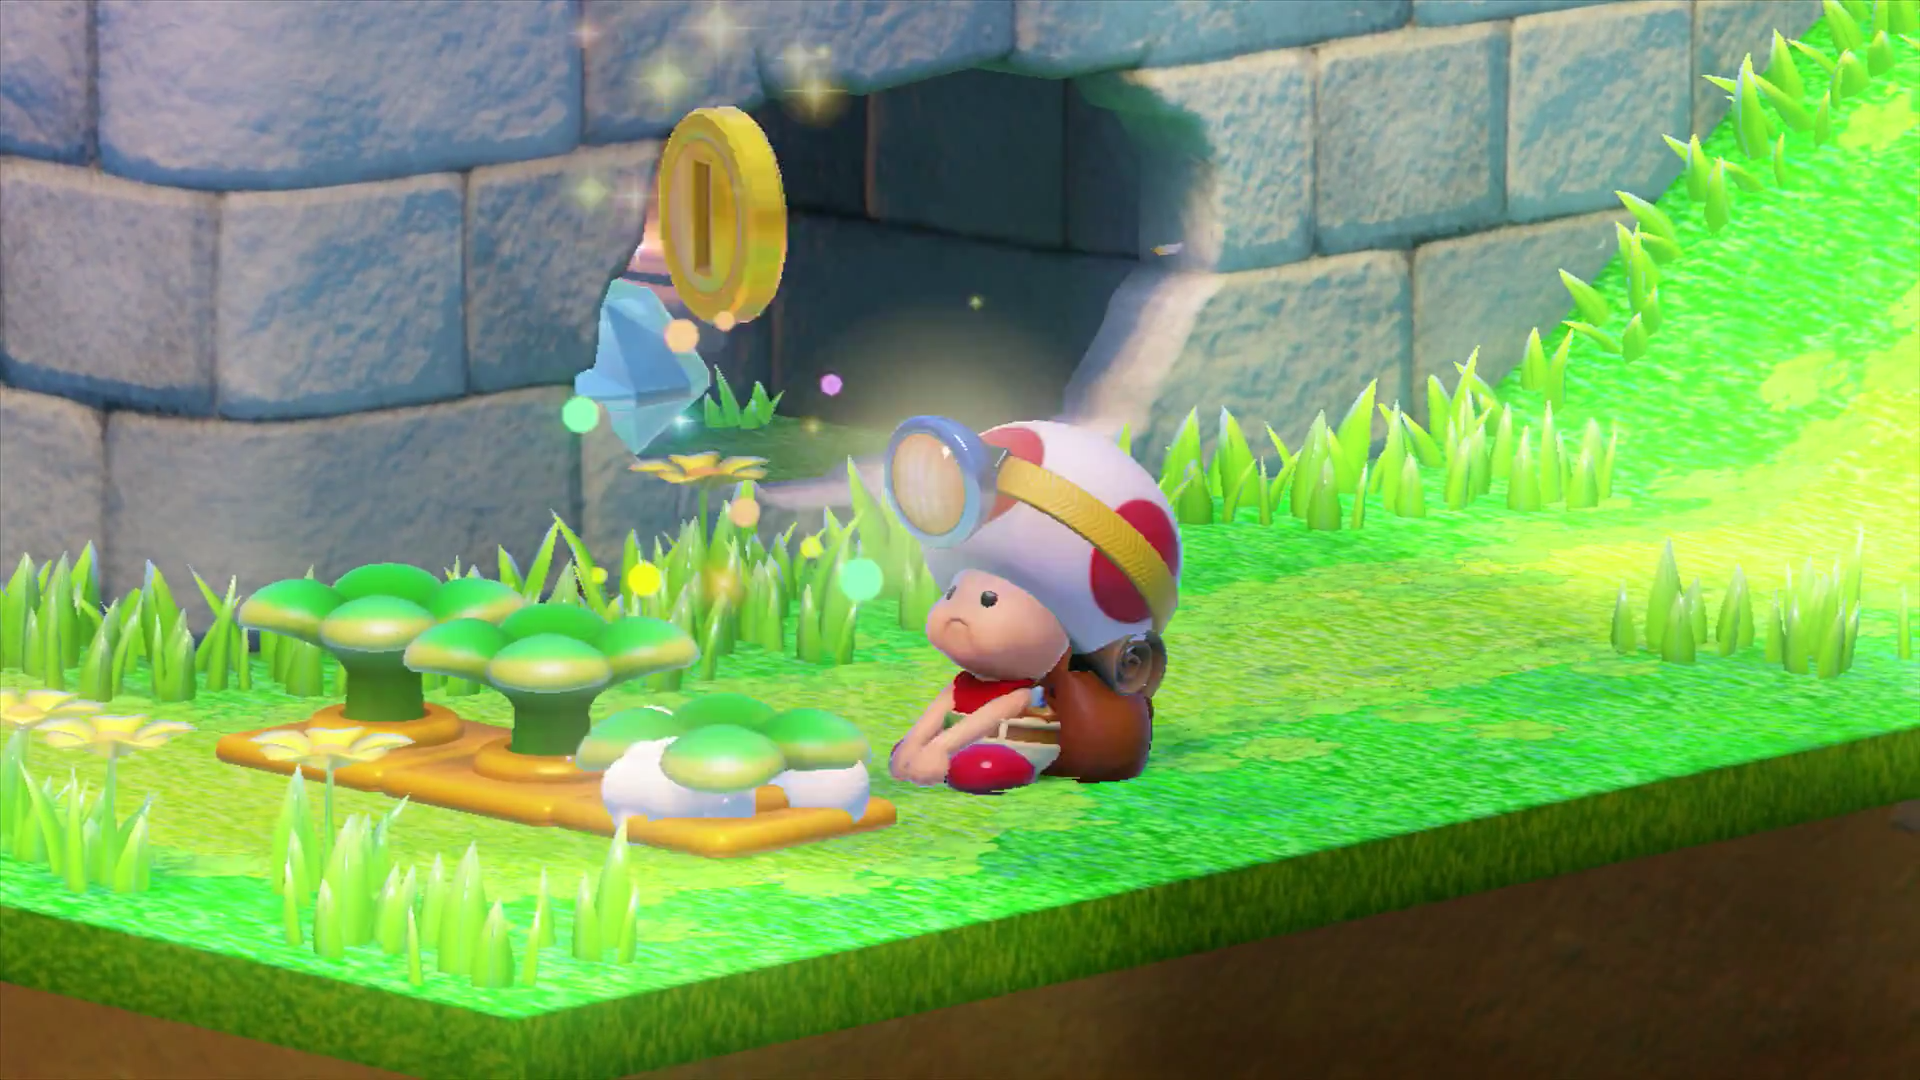 Captain Toad: Treasure Tracker is the realization of a 3D platformer in whi...